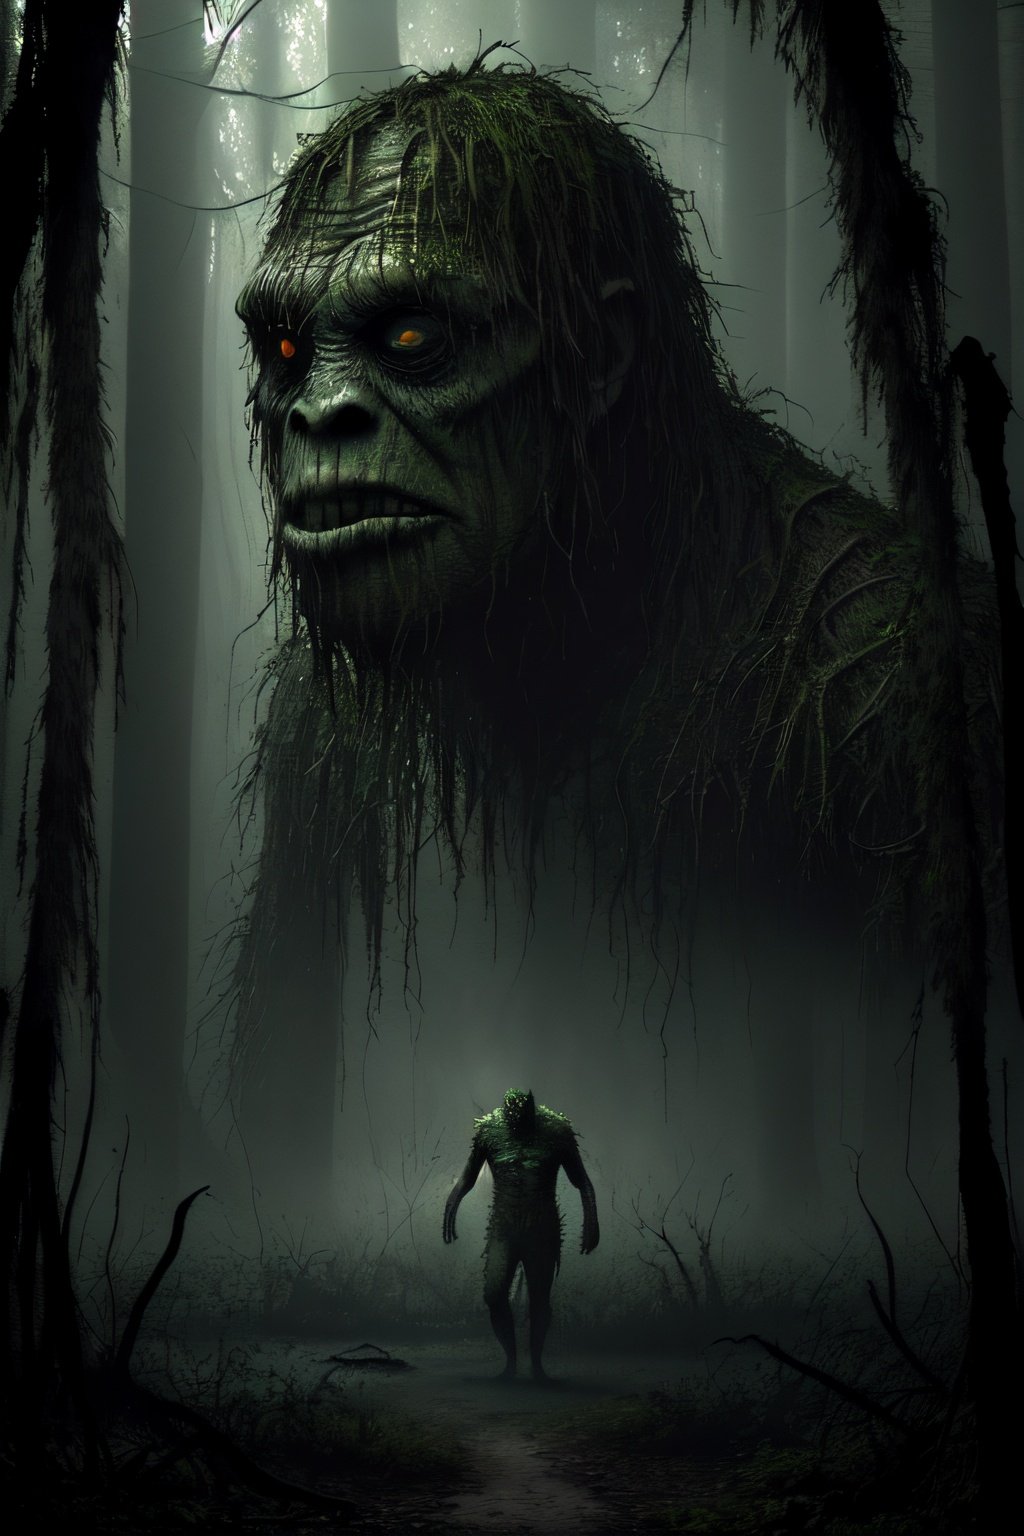 (Masterpiece),The swamp monster has weeds hiding its face. The monster emerges from the swamp into a forest with trees, Dark/Gritty mood, Scary/Frightening,High Detail, 8K, HDR, Realistic, Dramatic, Photorealistic 